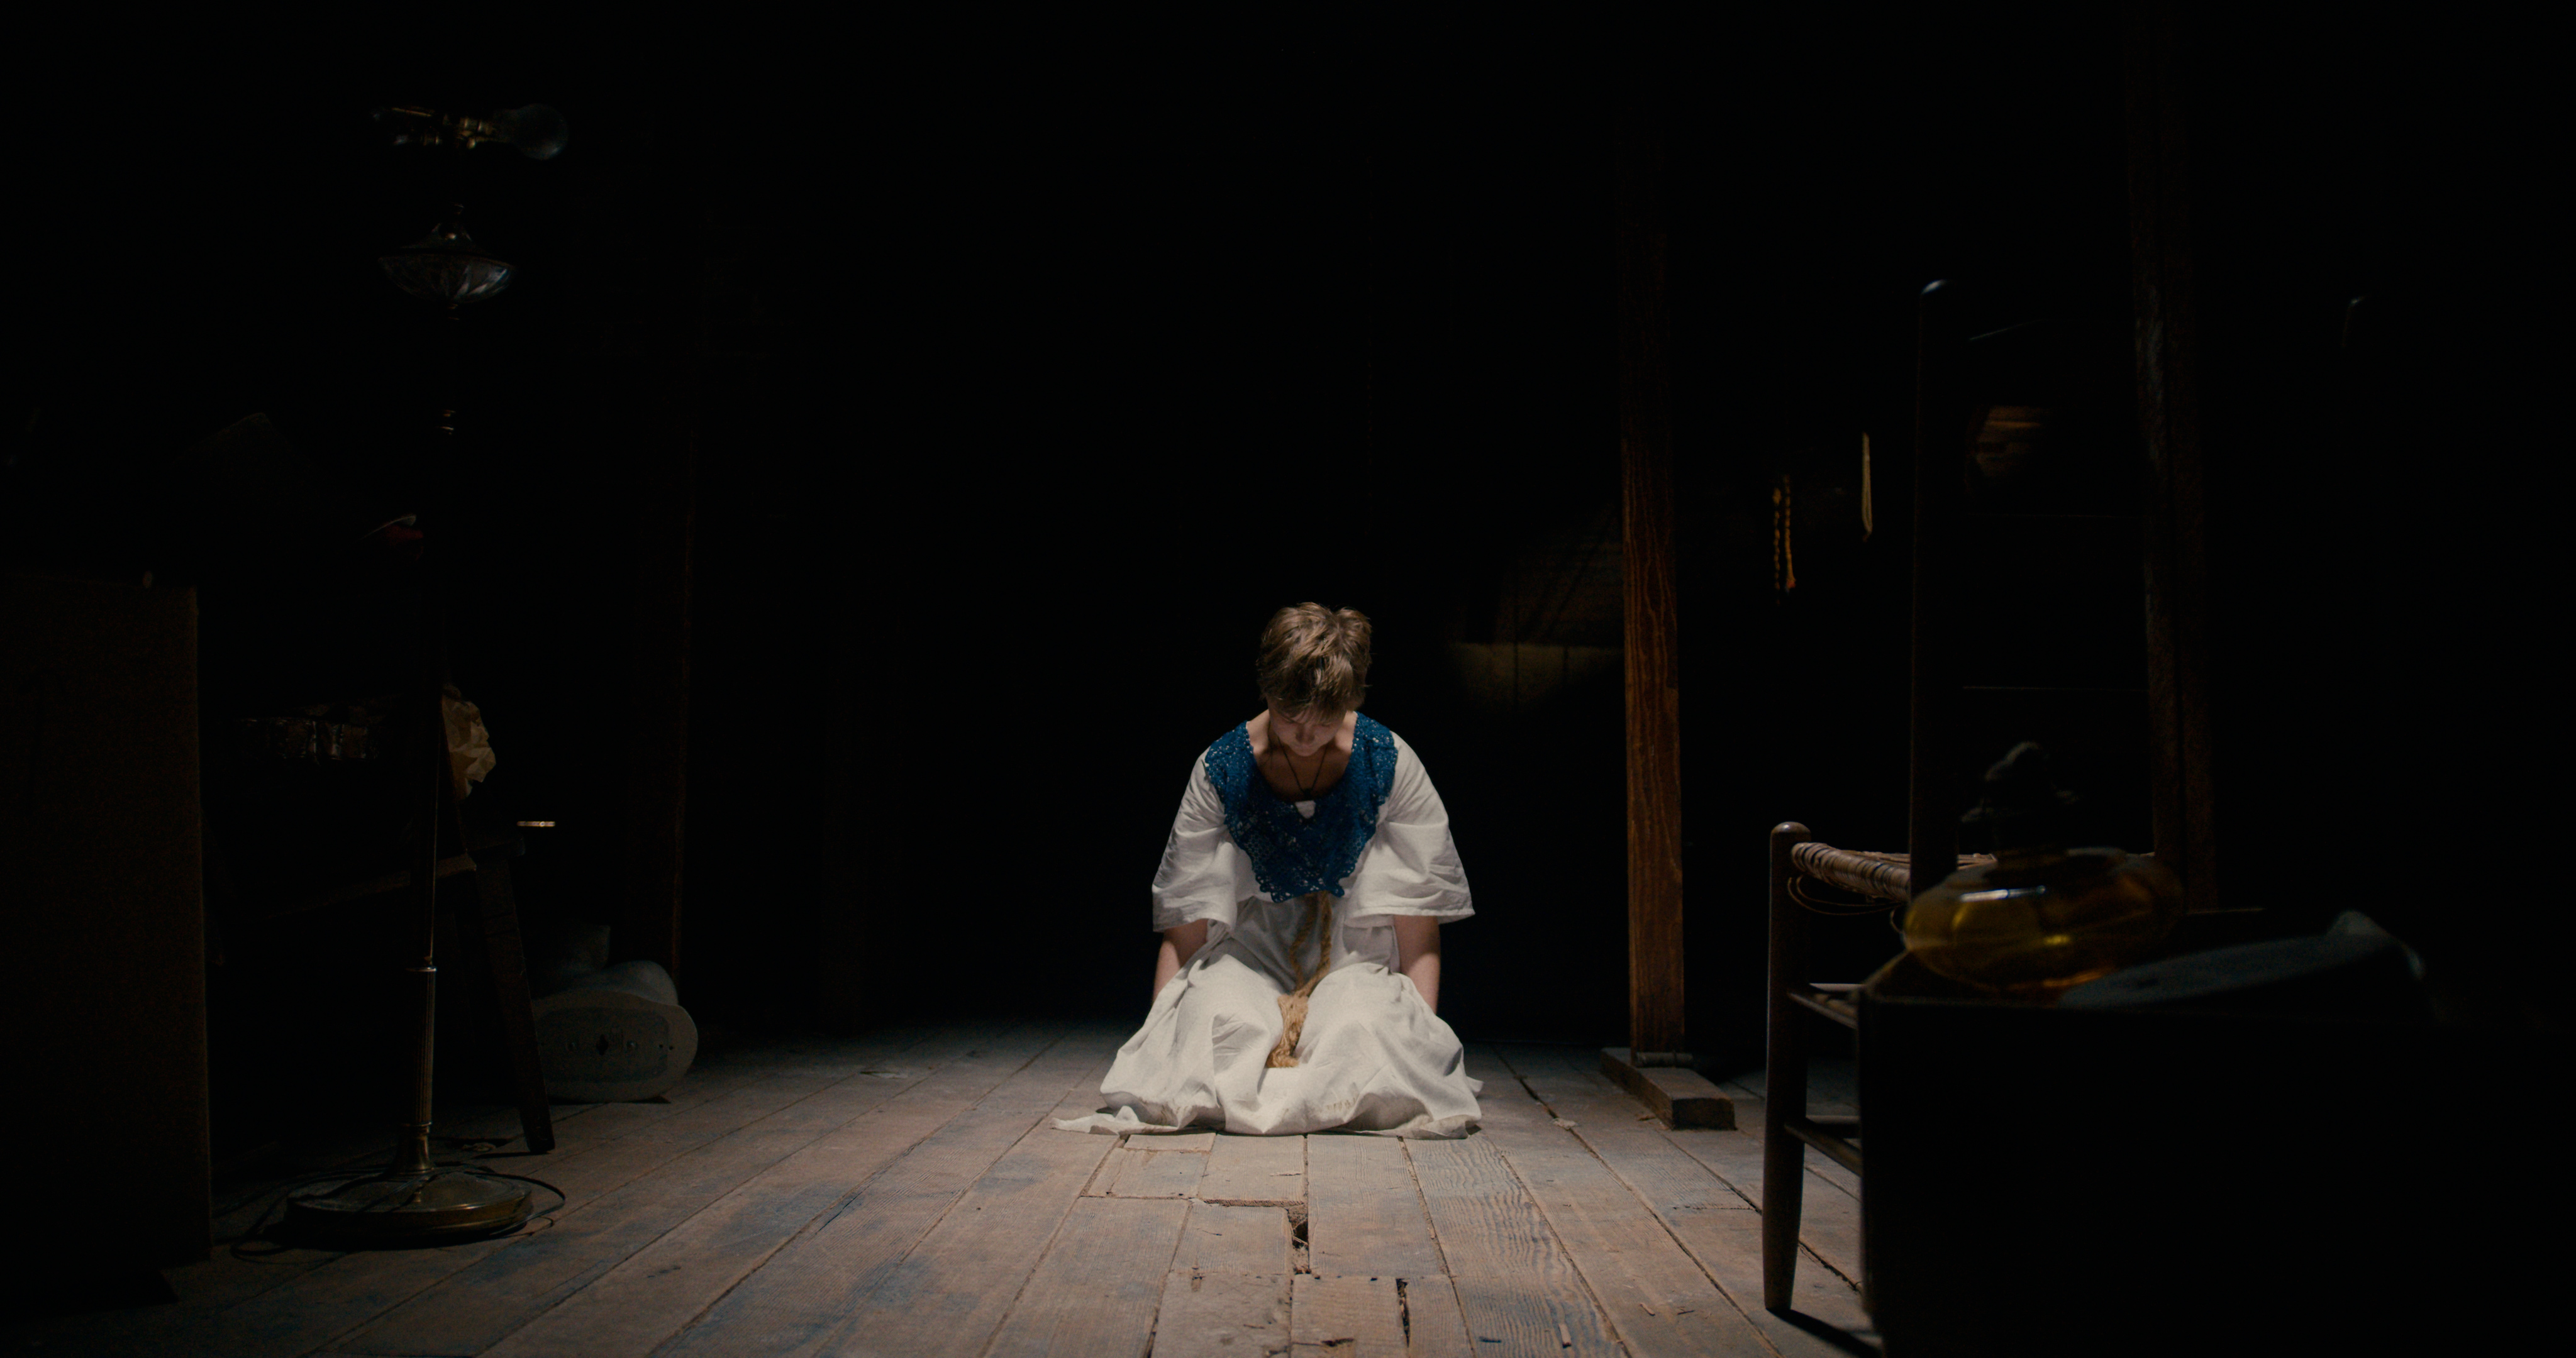 A still from Mind Body Spirit featuring a young woman in a dark room, sitting on the floor.